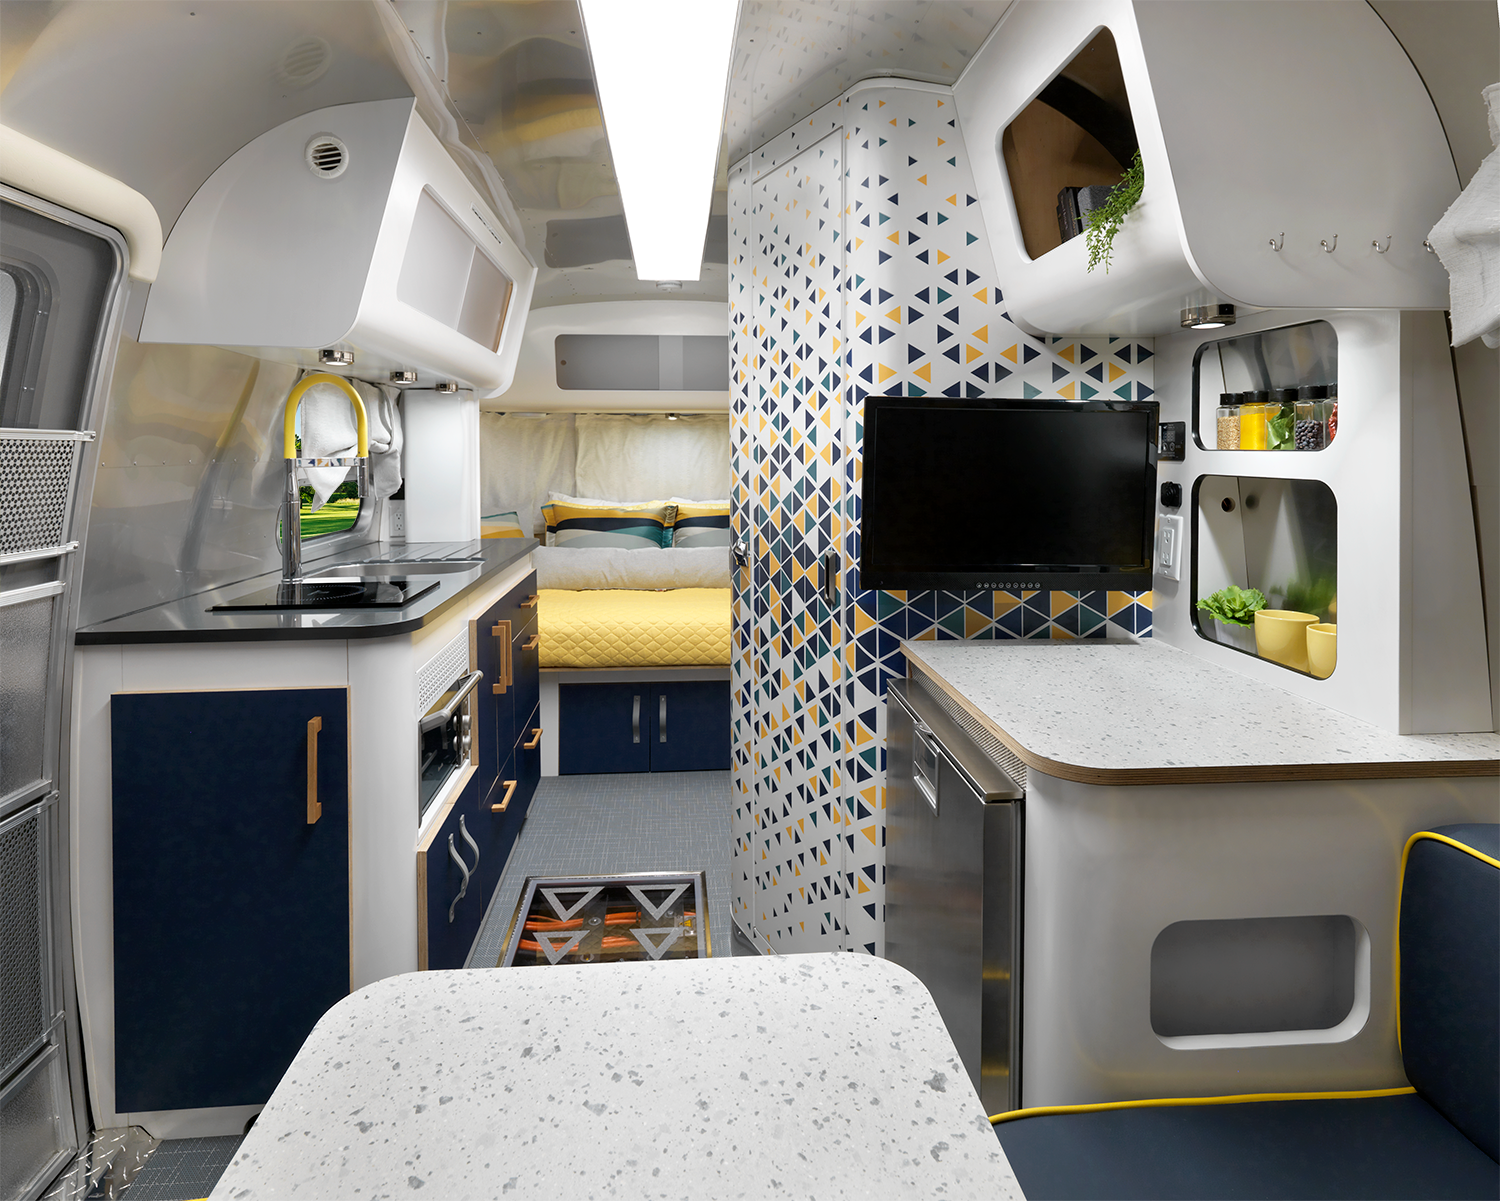 The galley and bedroom in Airstream's all electric estream travel trailer concept travel trailer.